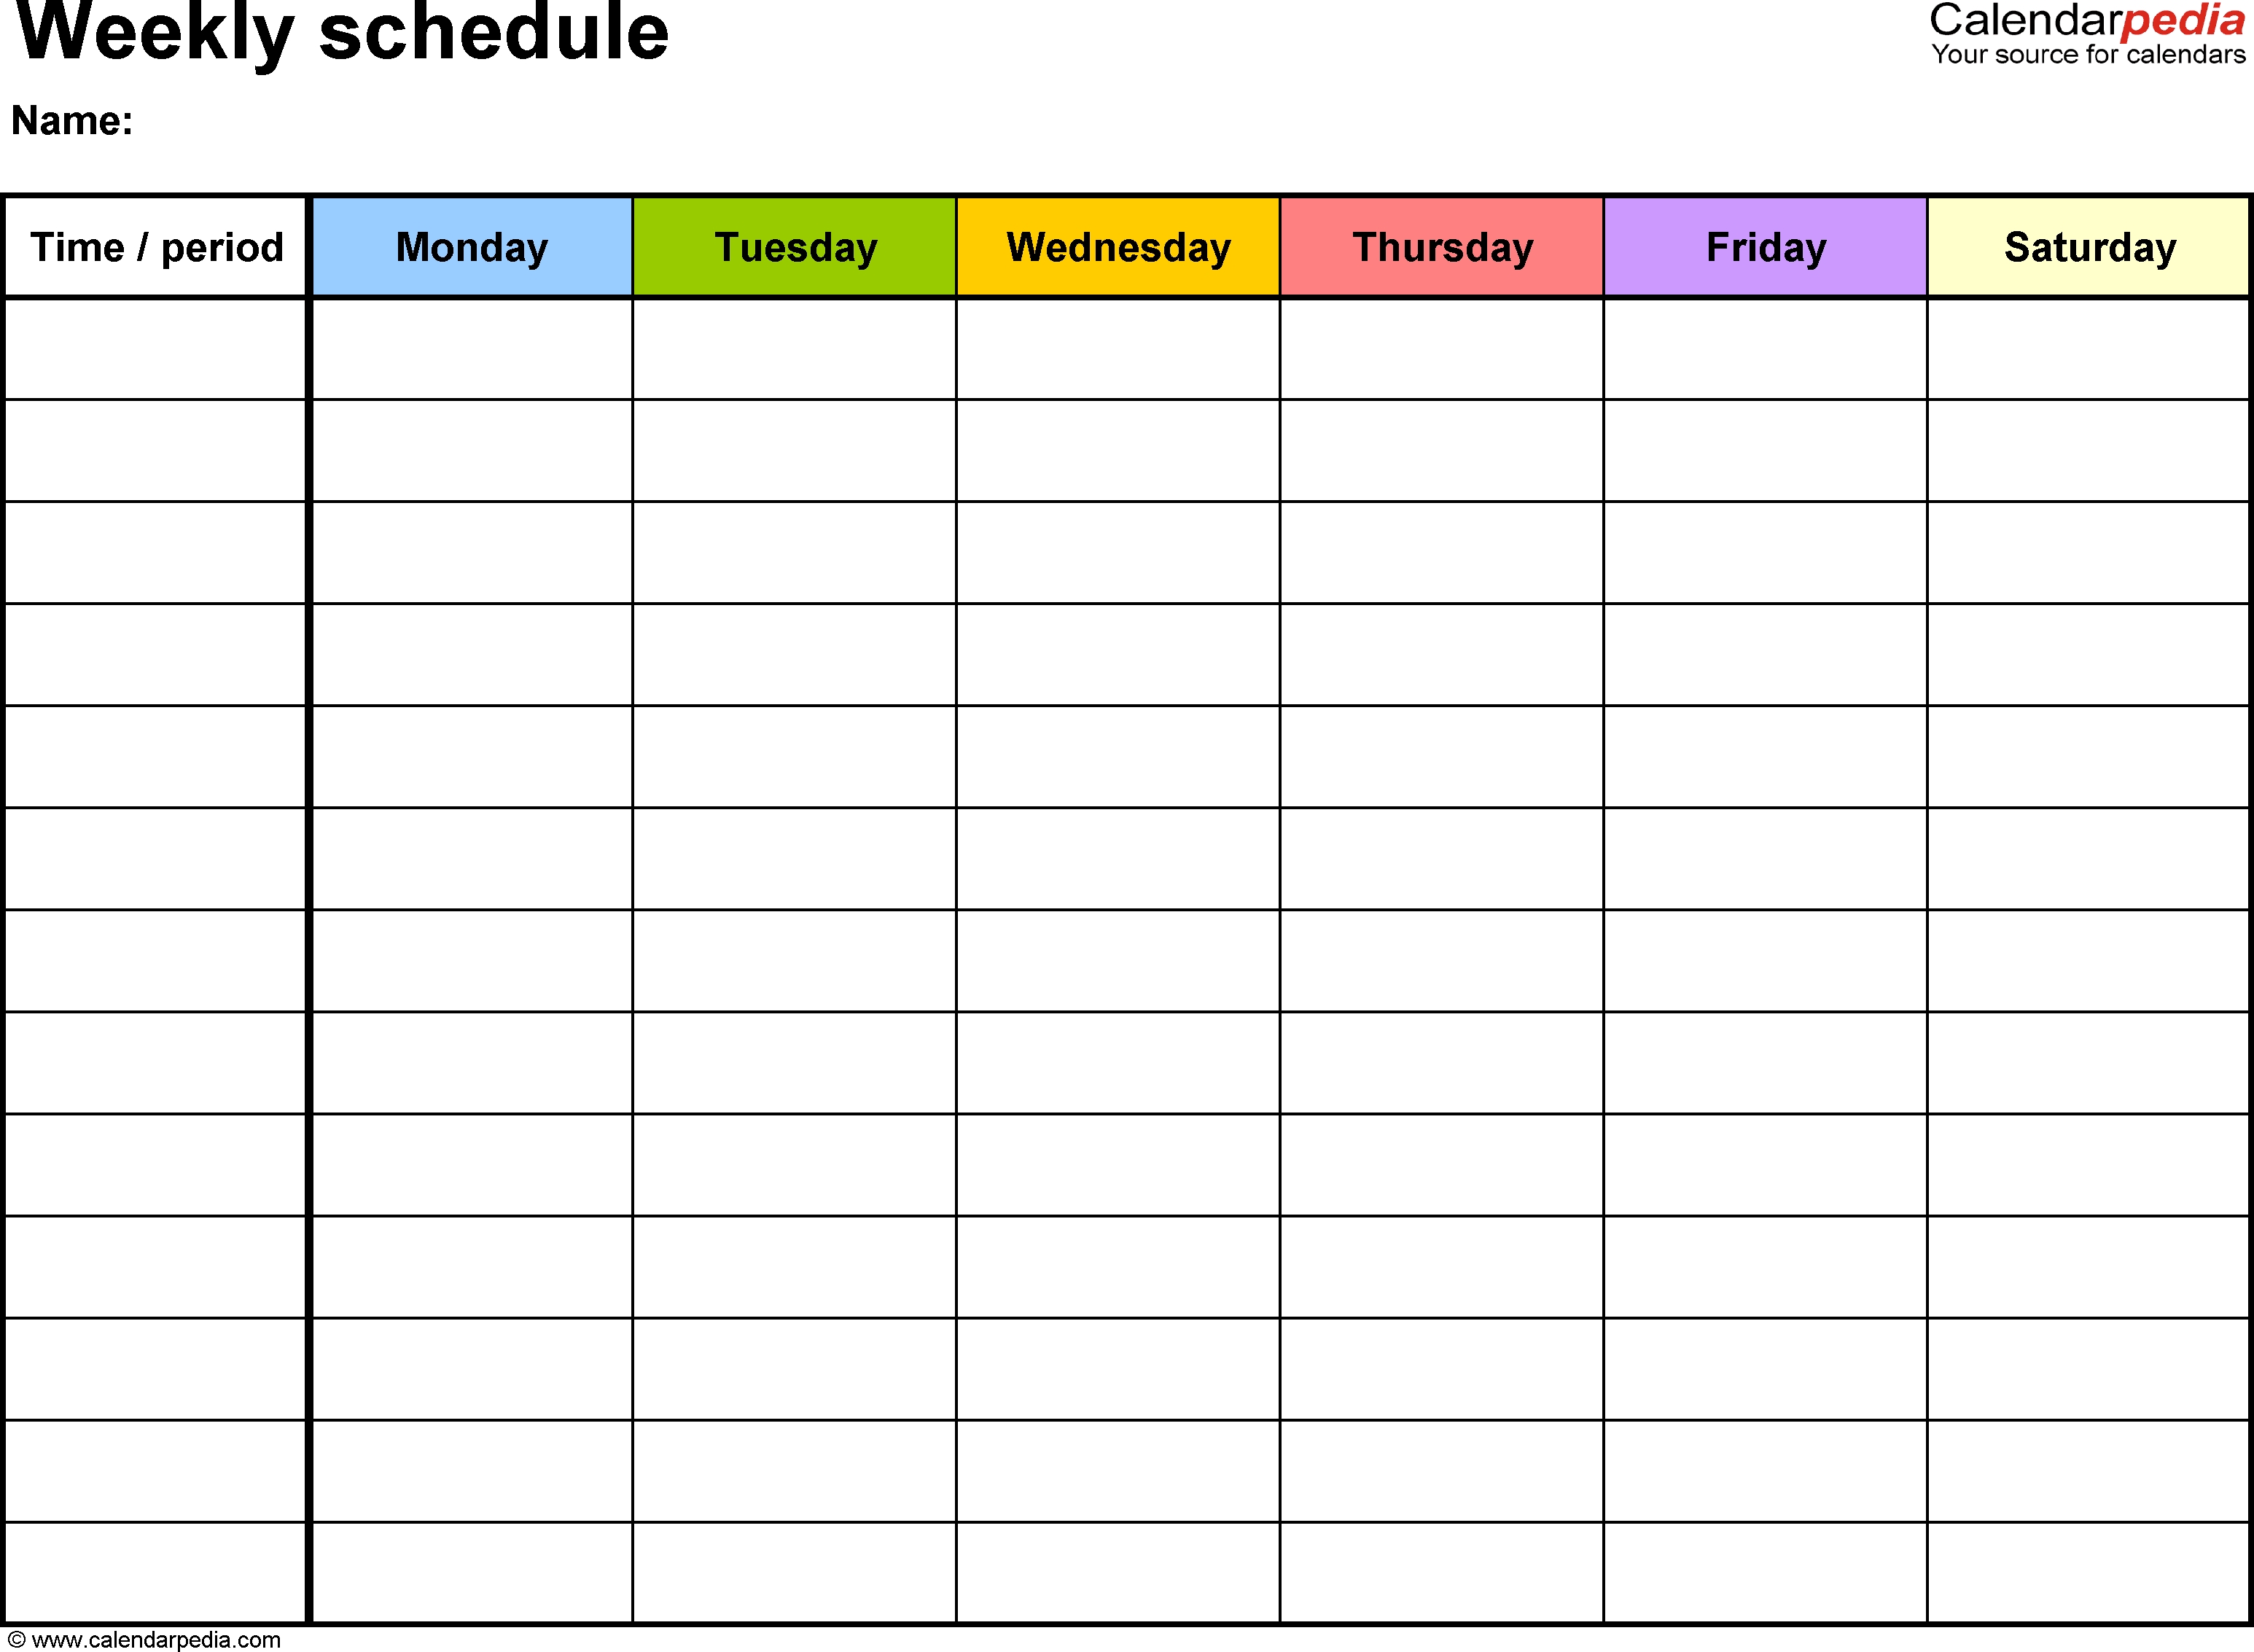 Free Weekly Schedule Templates For Word - 18 Templates intended for Free Template For Weekly Schedule